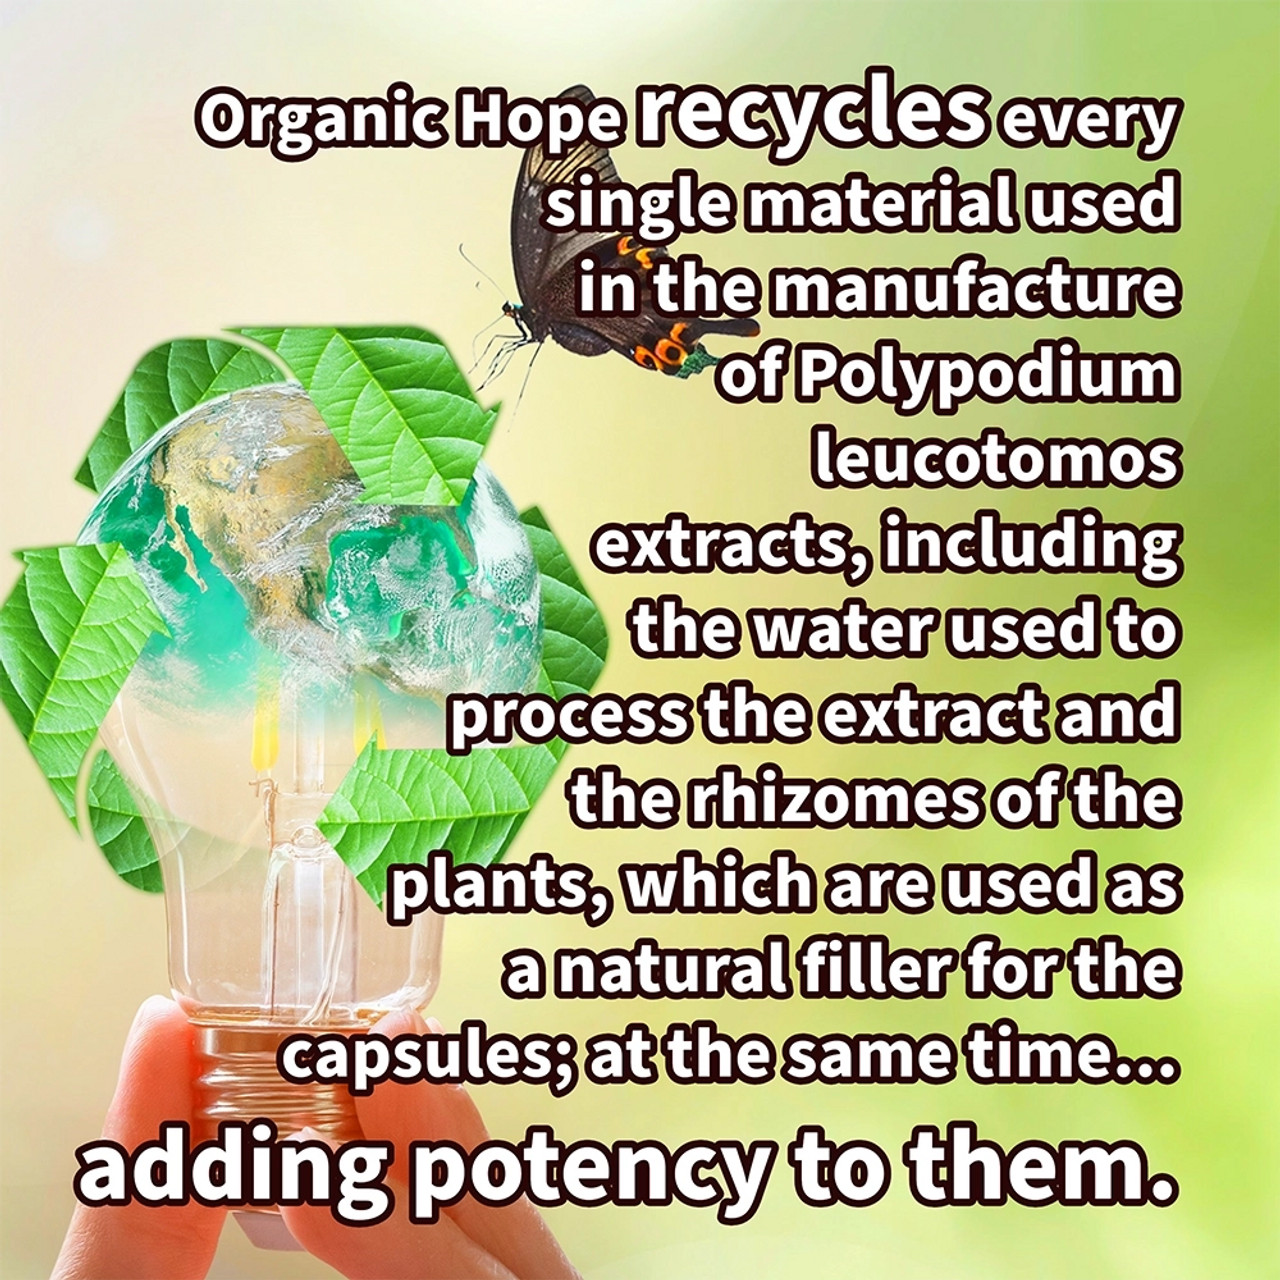 WITH THE PLANET IN MIND: Organic Hope recycles every single material used in the manufacturing of Polypodium leucotomos extracts, including the water used to process the extract and the rhizomes of the plants, which are used as a natural filler for the capsules; at the same time adding potency to them.